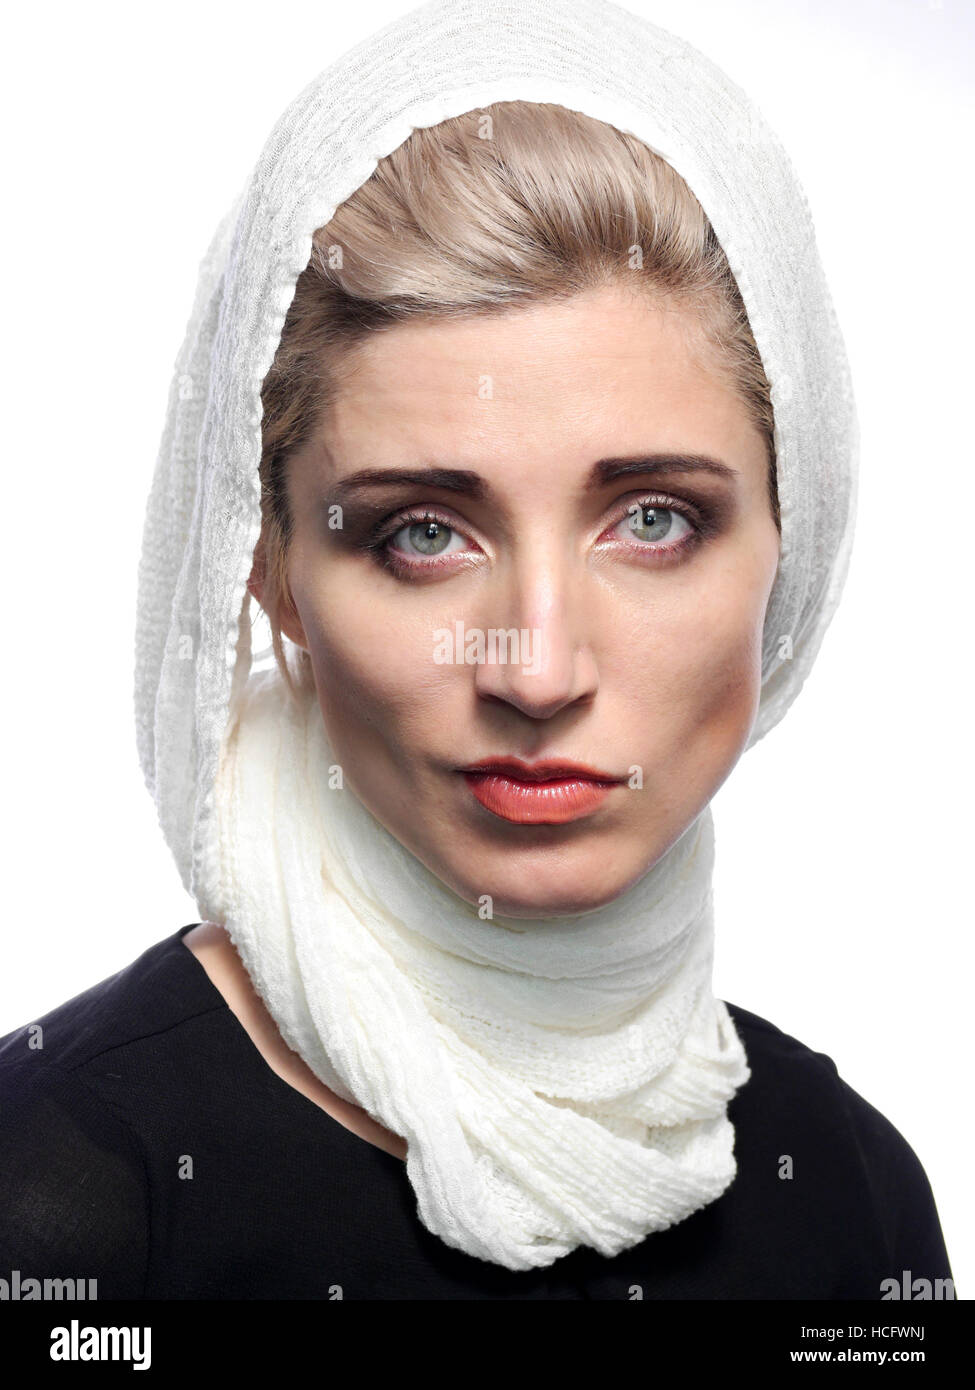 A head and shoulder portrait of a blond haired woman wearing a white scarf. Stock Photo